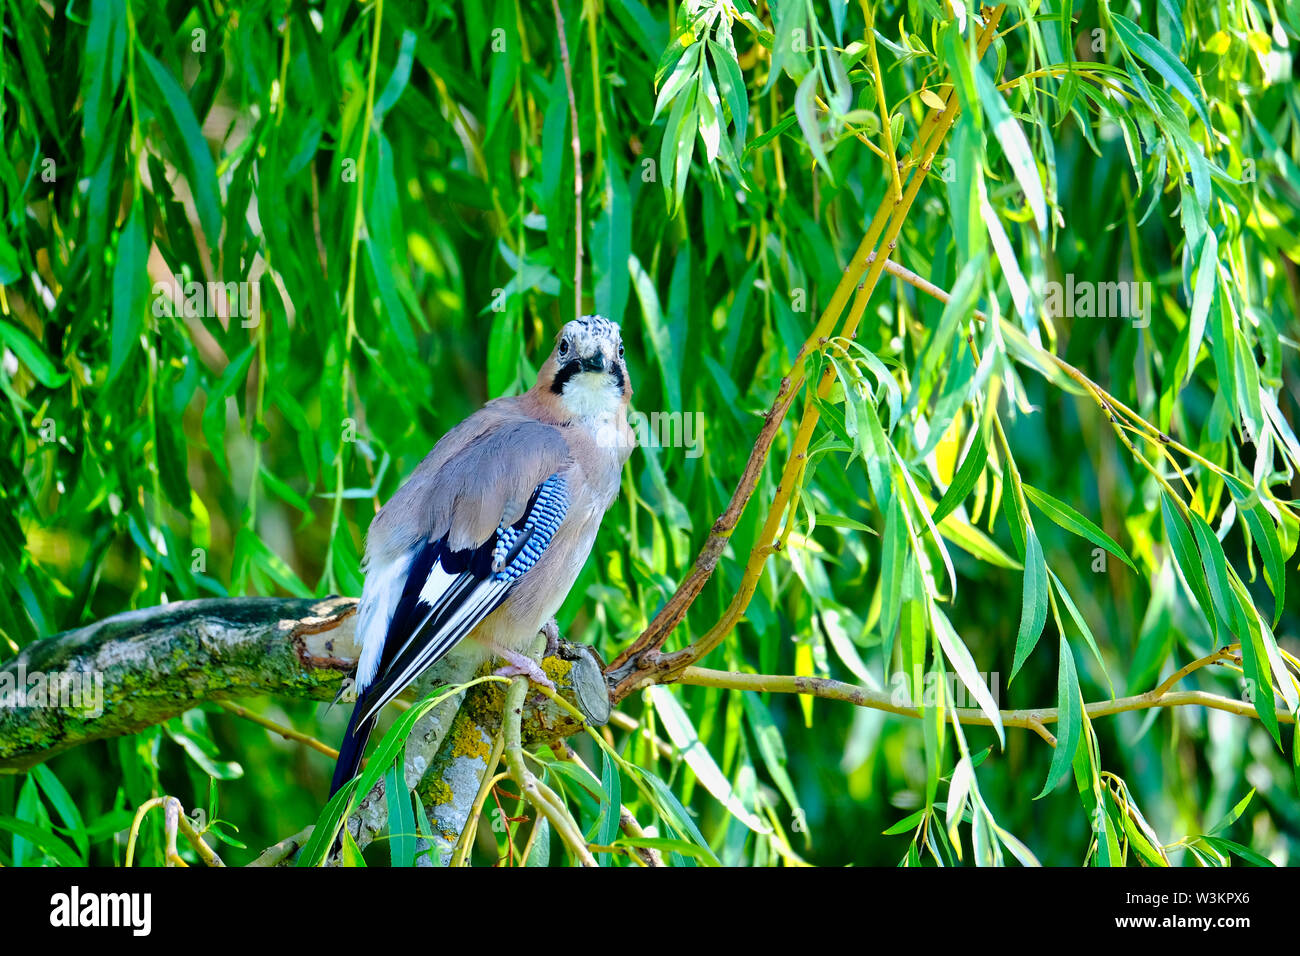 West Sussex, England, UK. Single Eurasian Jay (Garrulus glandarius) perched on the branch of a Weeping Willow tree (Salix babylonica) Stock Photo